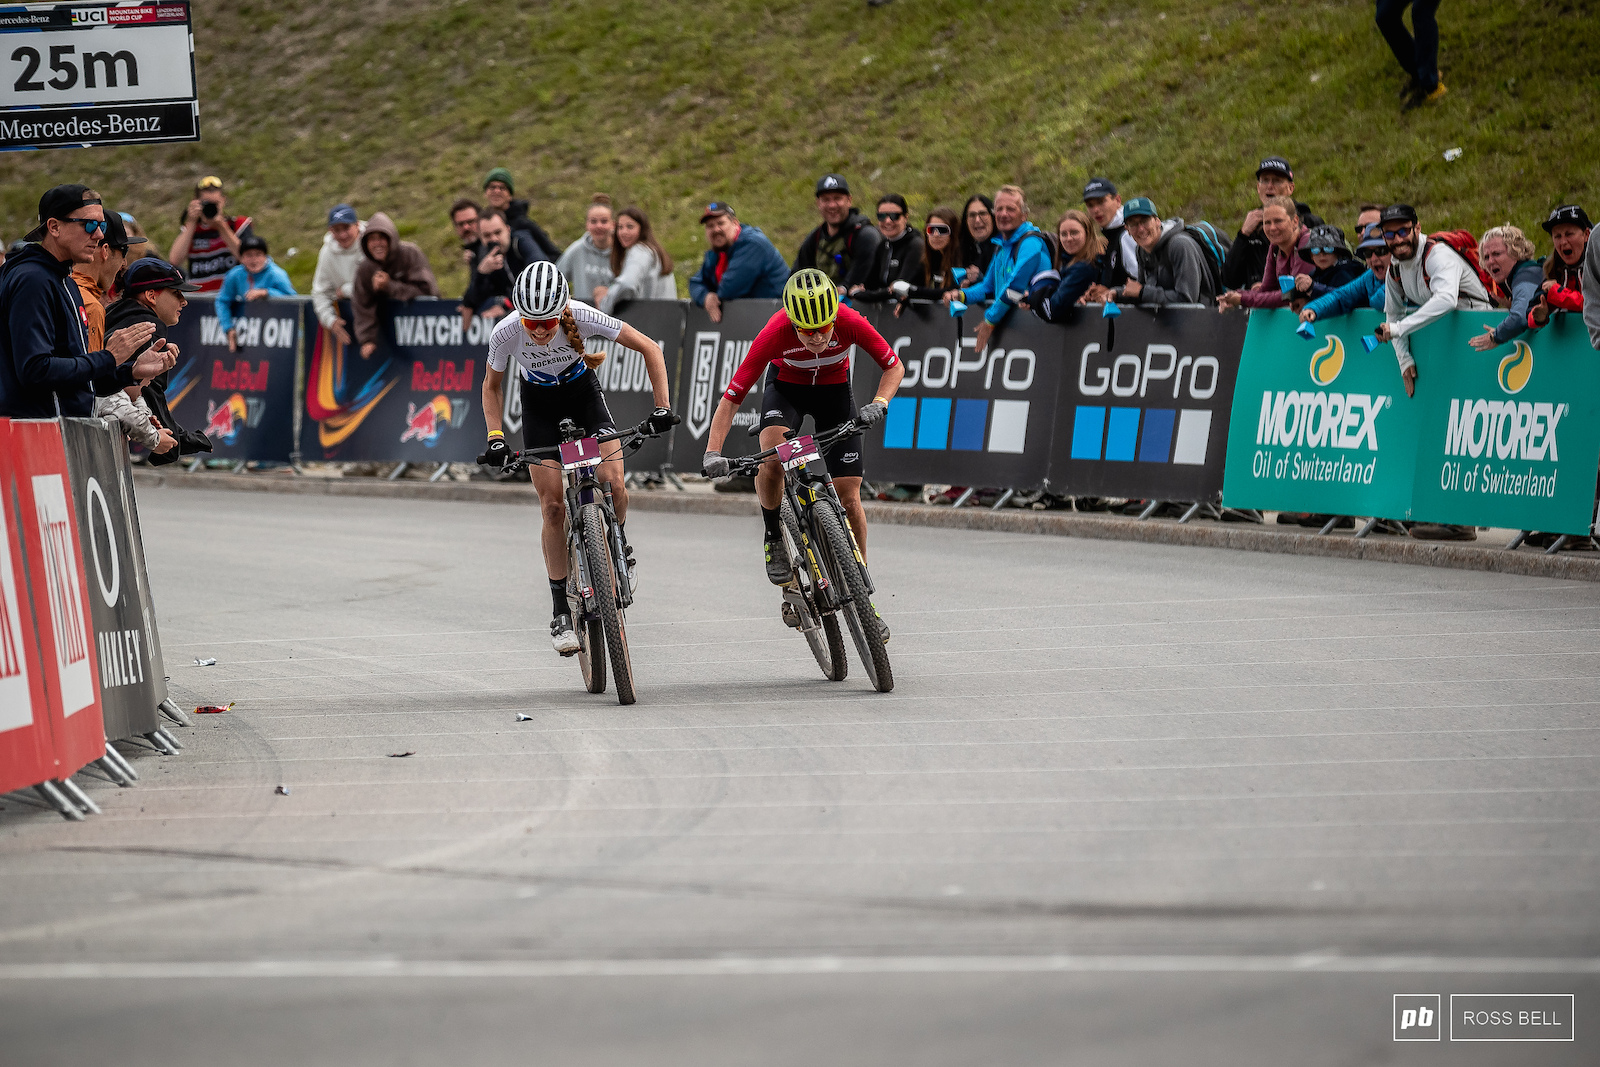 The sprint would come down to a photo finish with Sofie Pedersen just sneaking ahead.